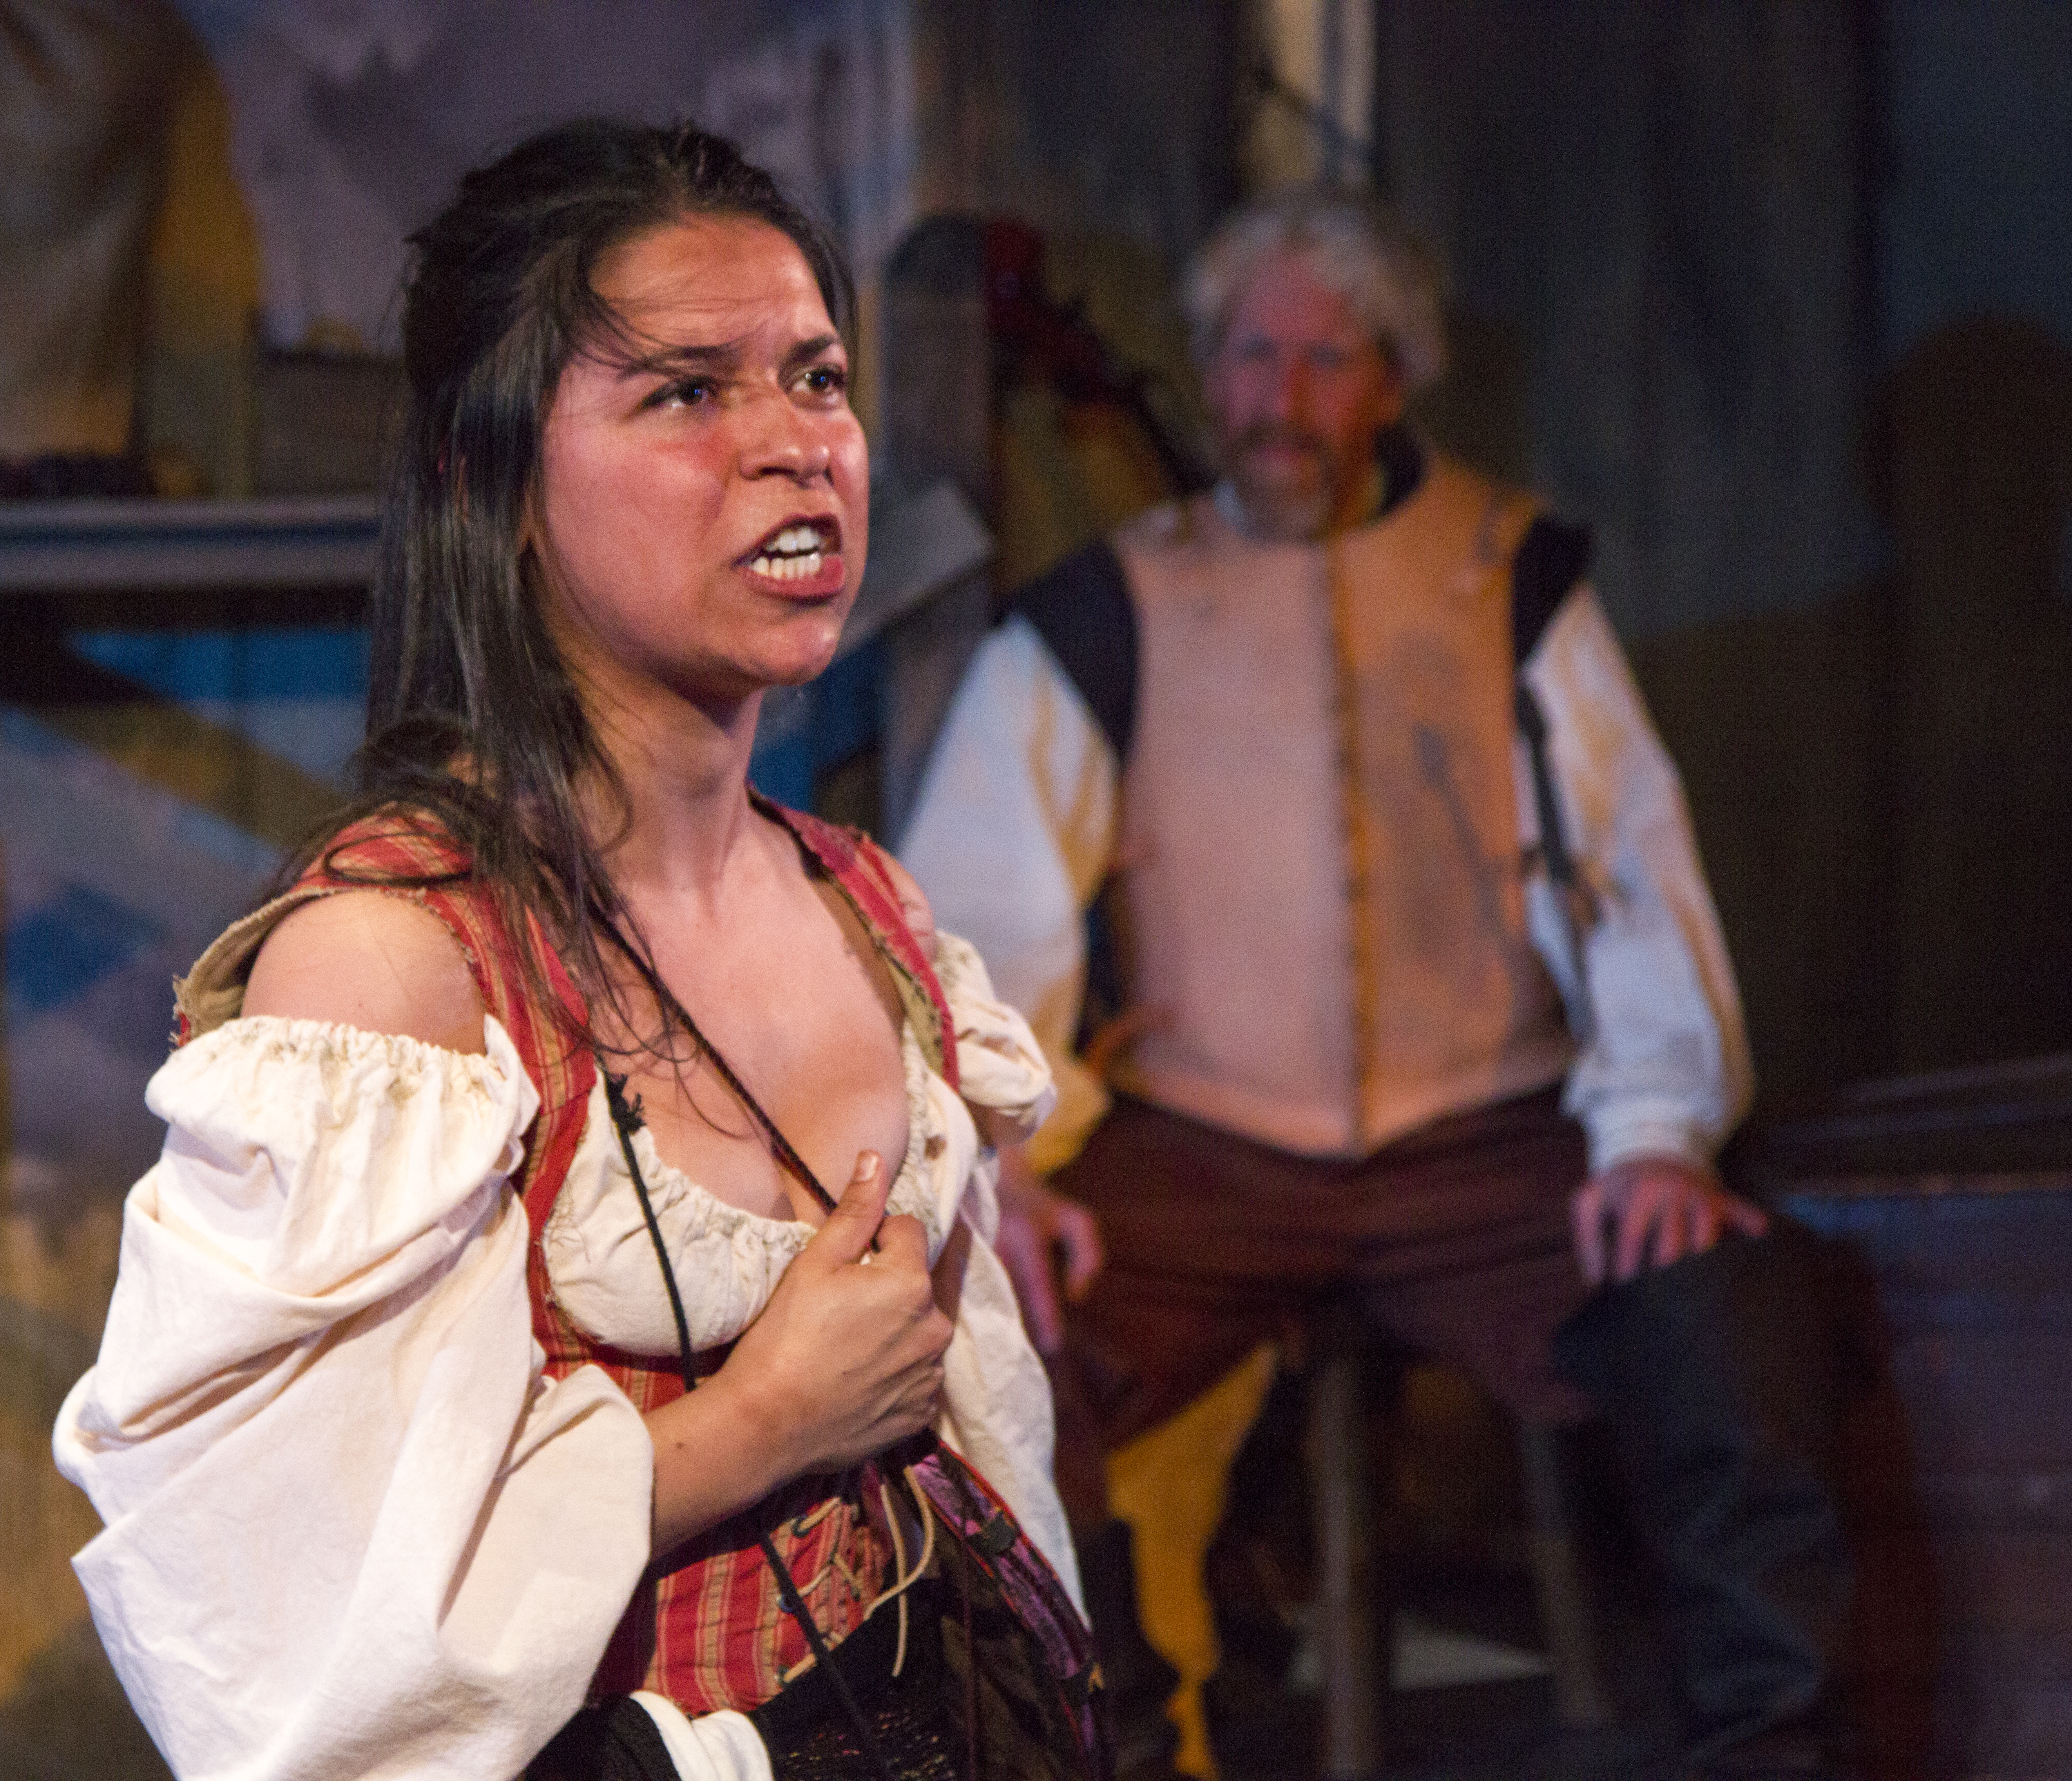 Maria Konstantinidis stars as Aldonza/Dulcinea in Act II Playhouse's production of "Man of La Mancha," now playing through June 8, 2014. Photo by Bill D'Agostino.